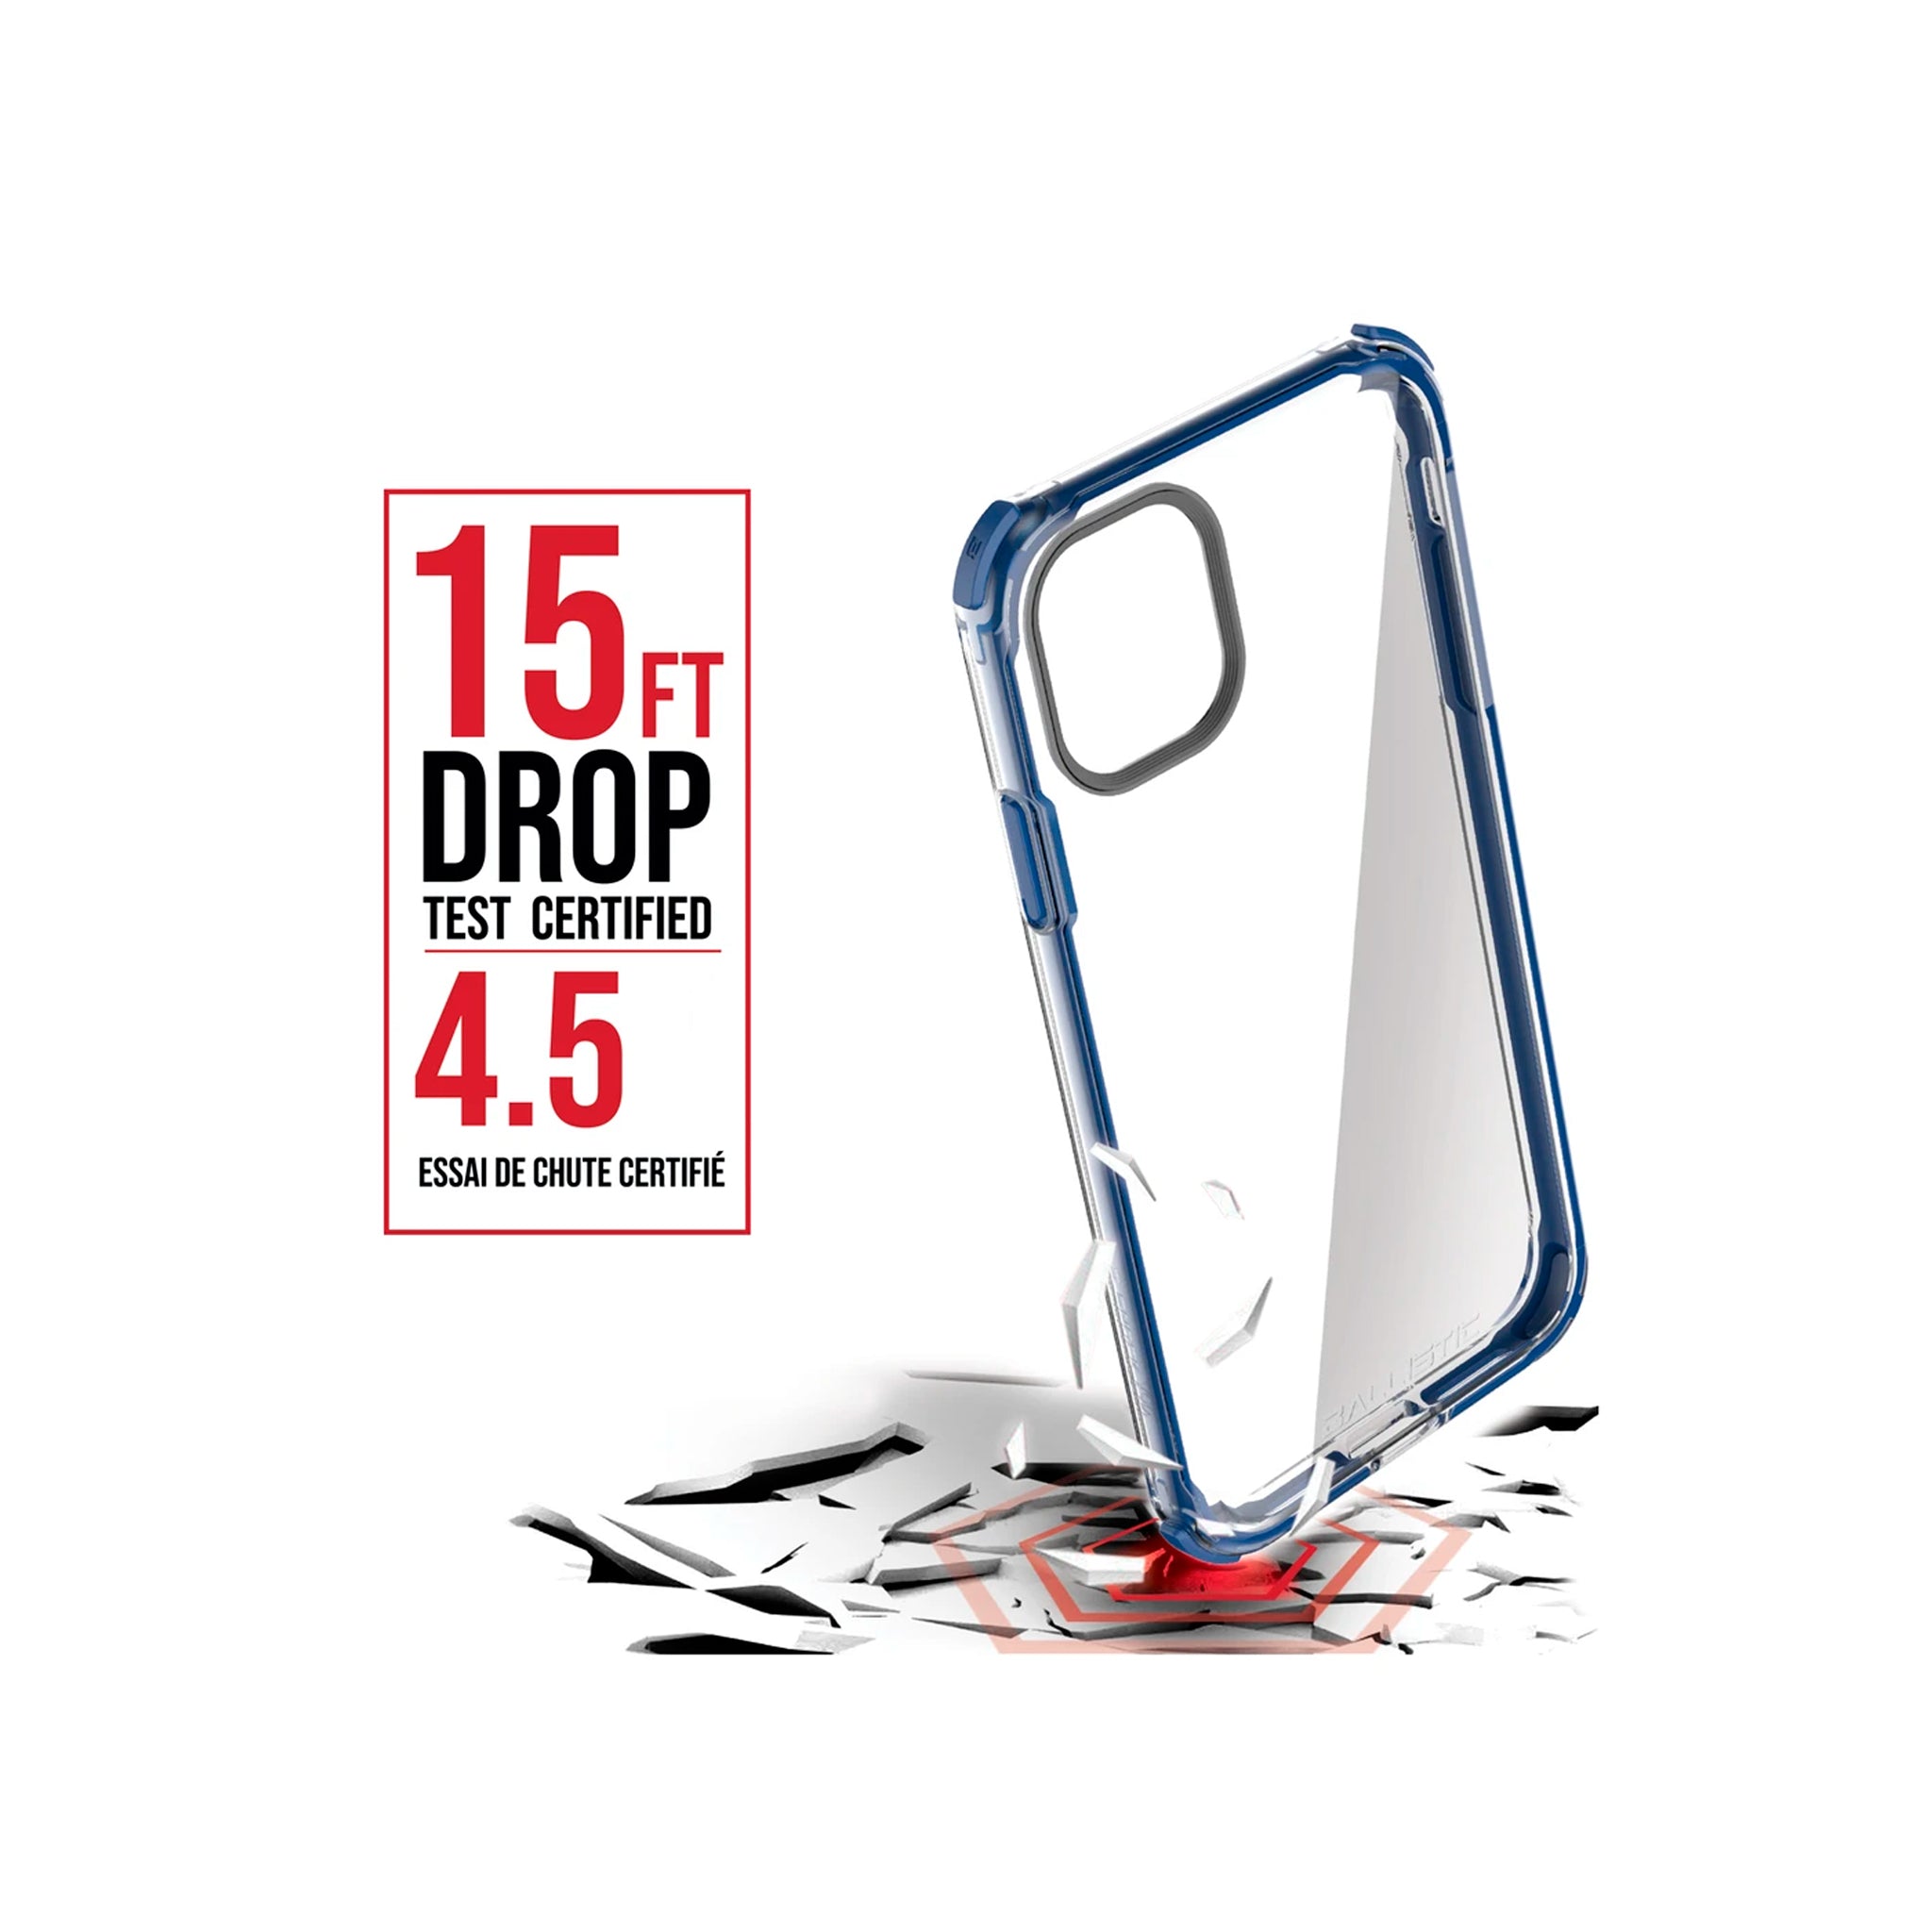 Ballistic - Bshock X90 Series For iPhone 11 Pro Max  - Blue